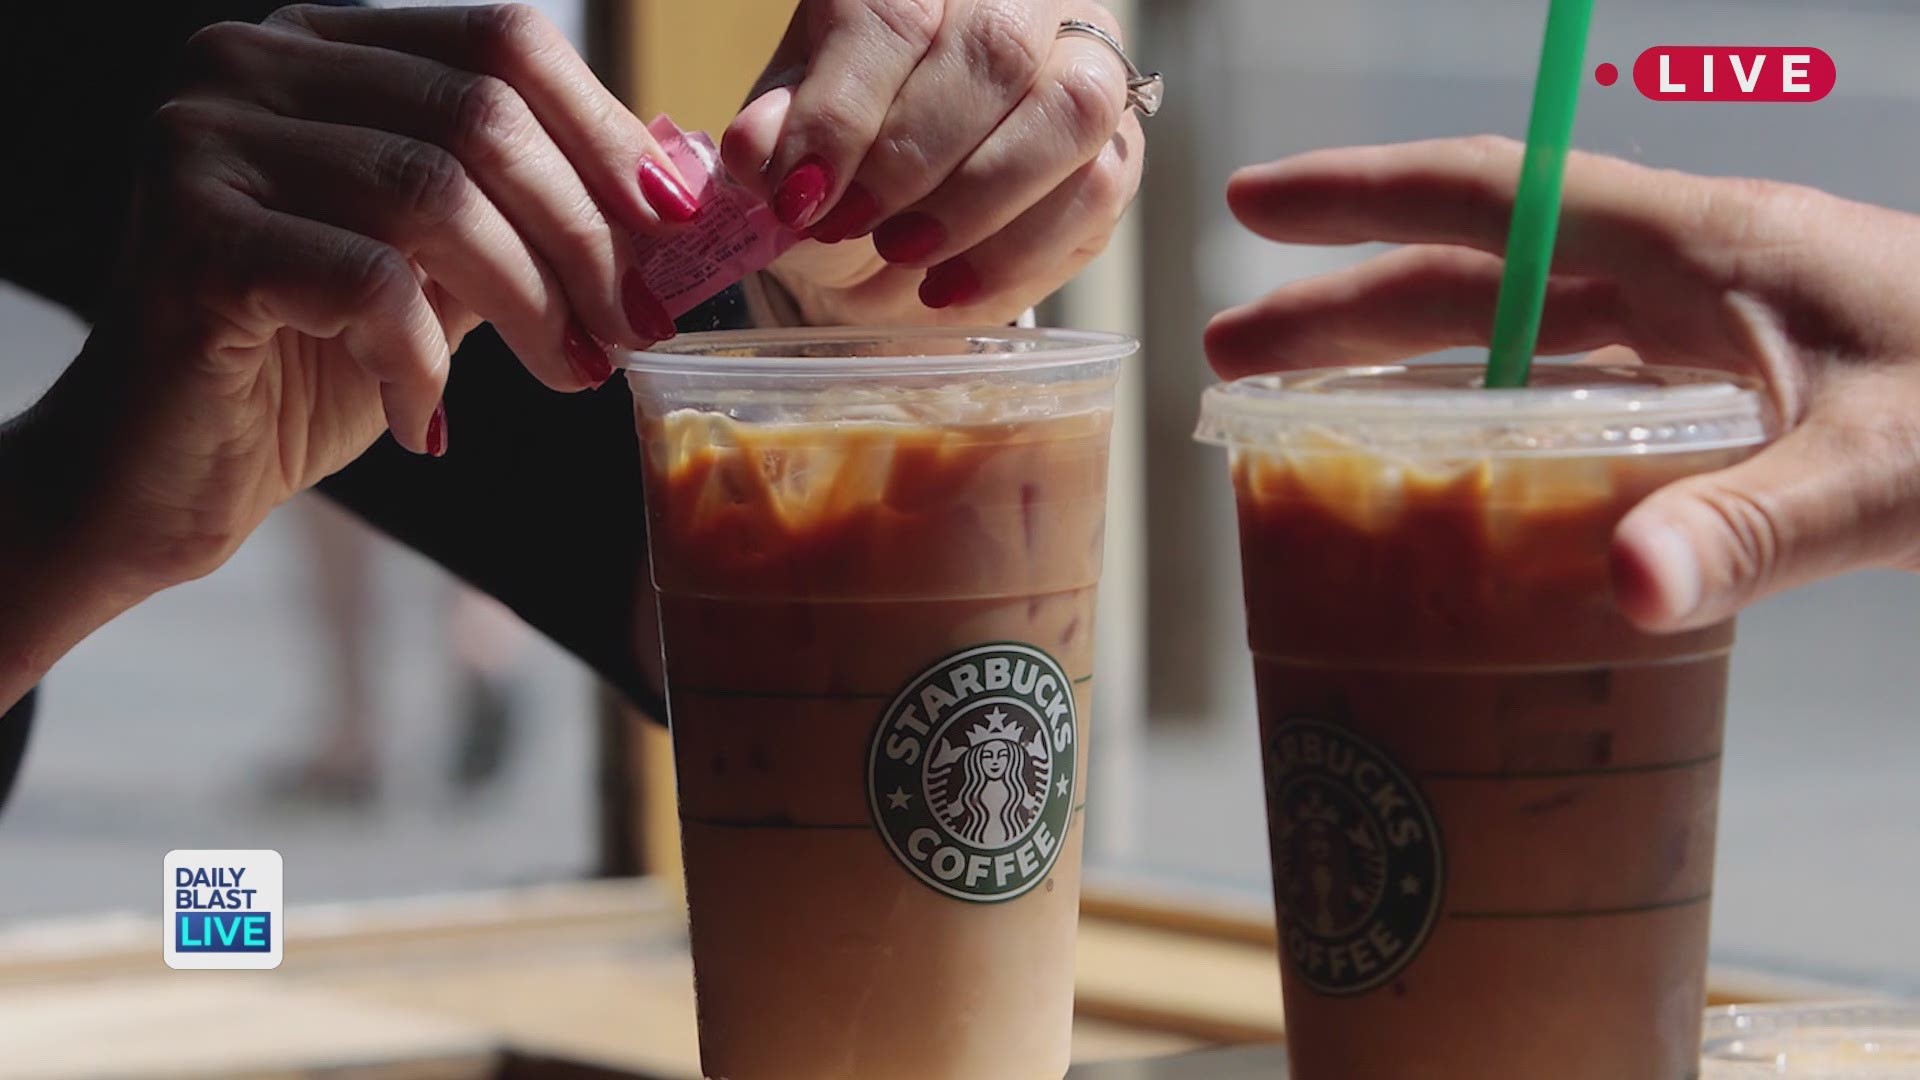 Coffee giant Starbucks announced the global food and beverage company is eliminating plastic straws from all locations. A week after its hometown banned plastic drinking straws and utensils, the Seattle company said Monday that by 2020 it will be using on